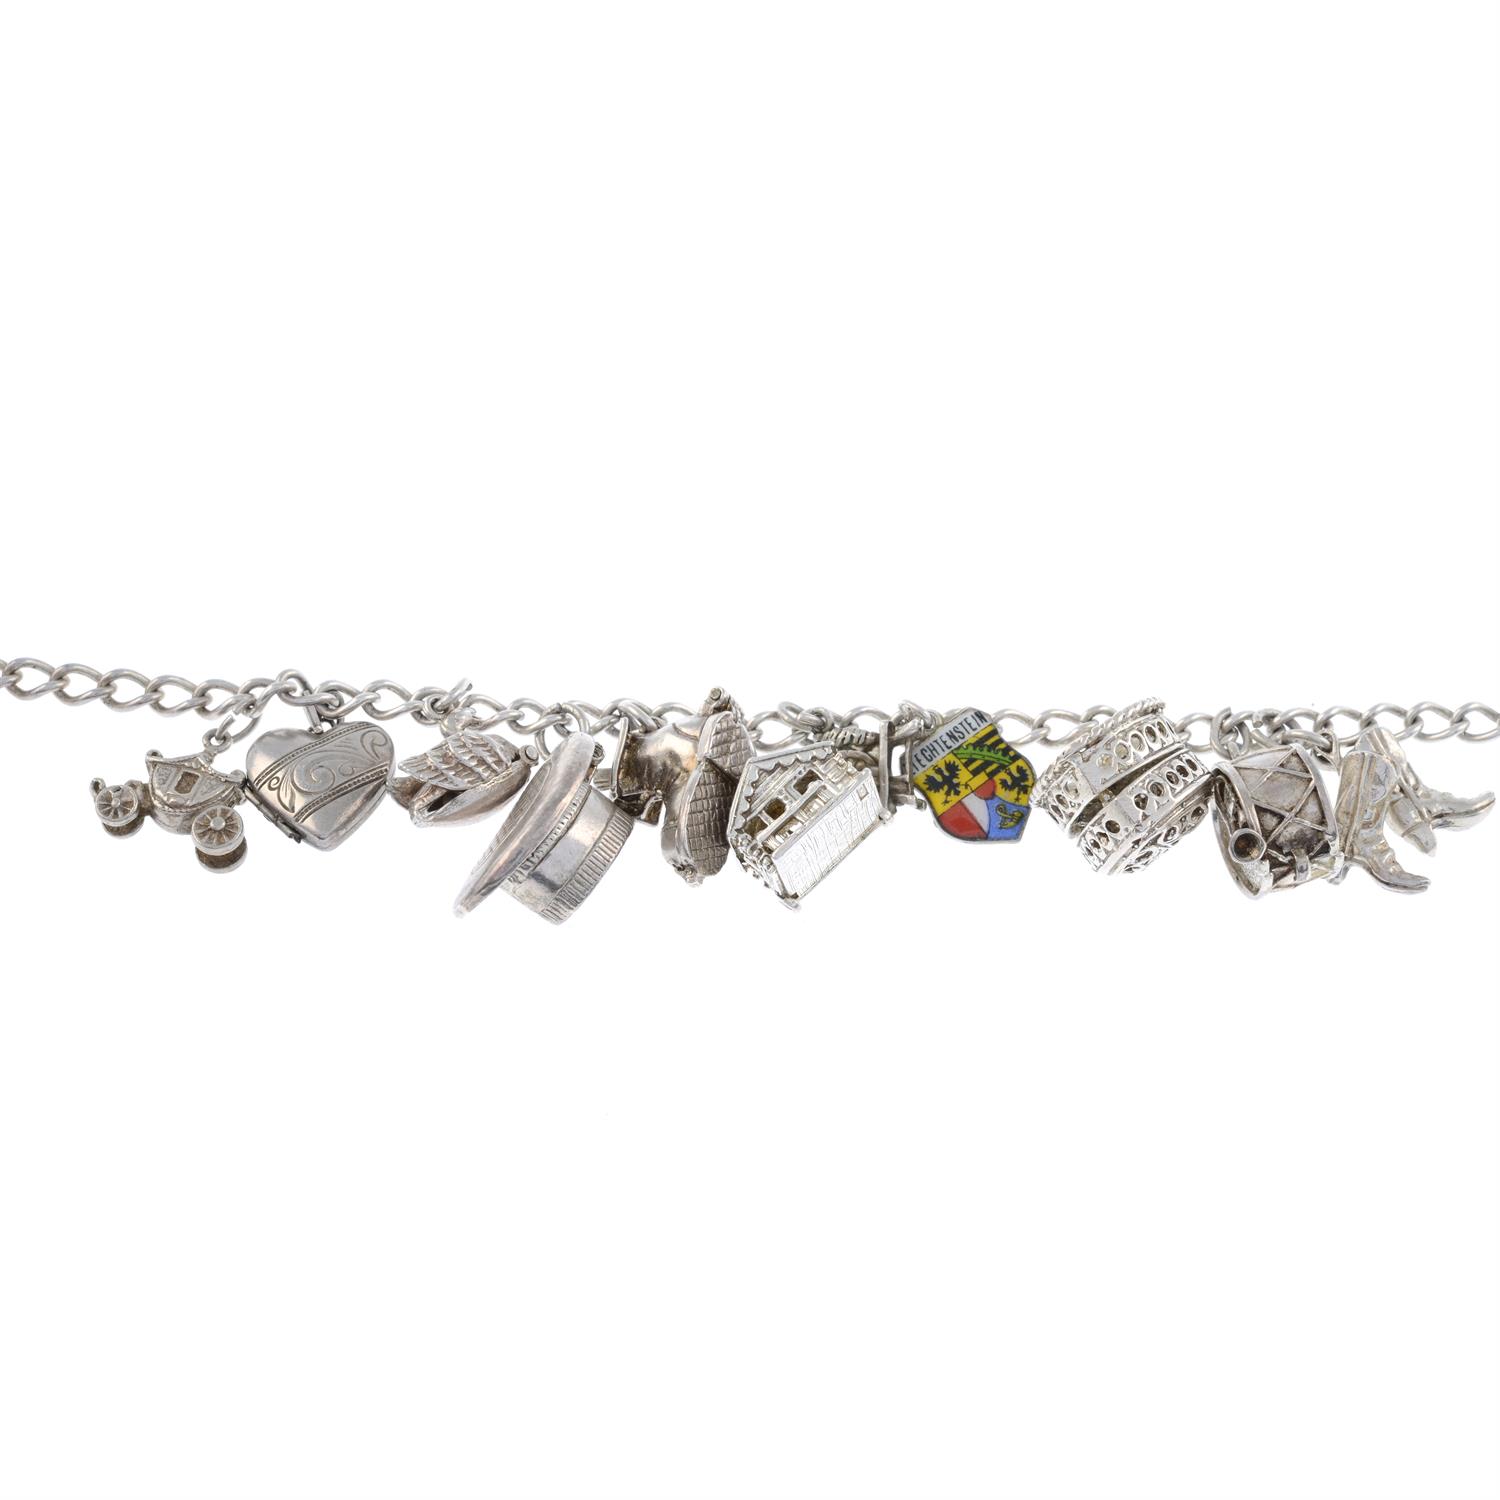 Charm bracelet, with charms - Image 2 of 2